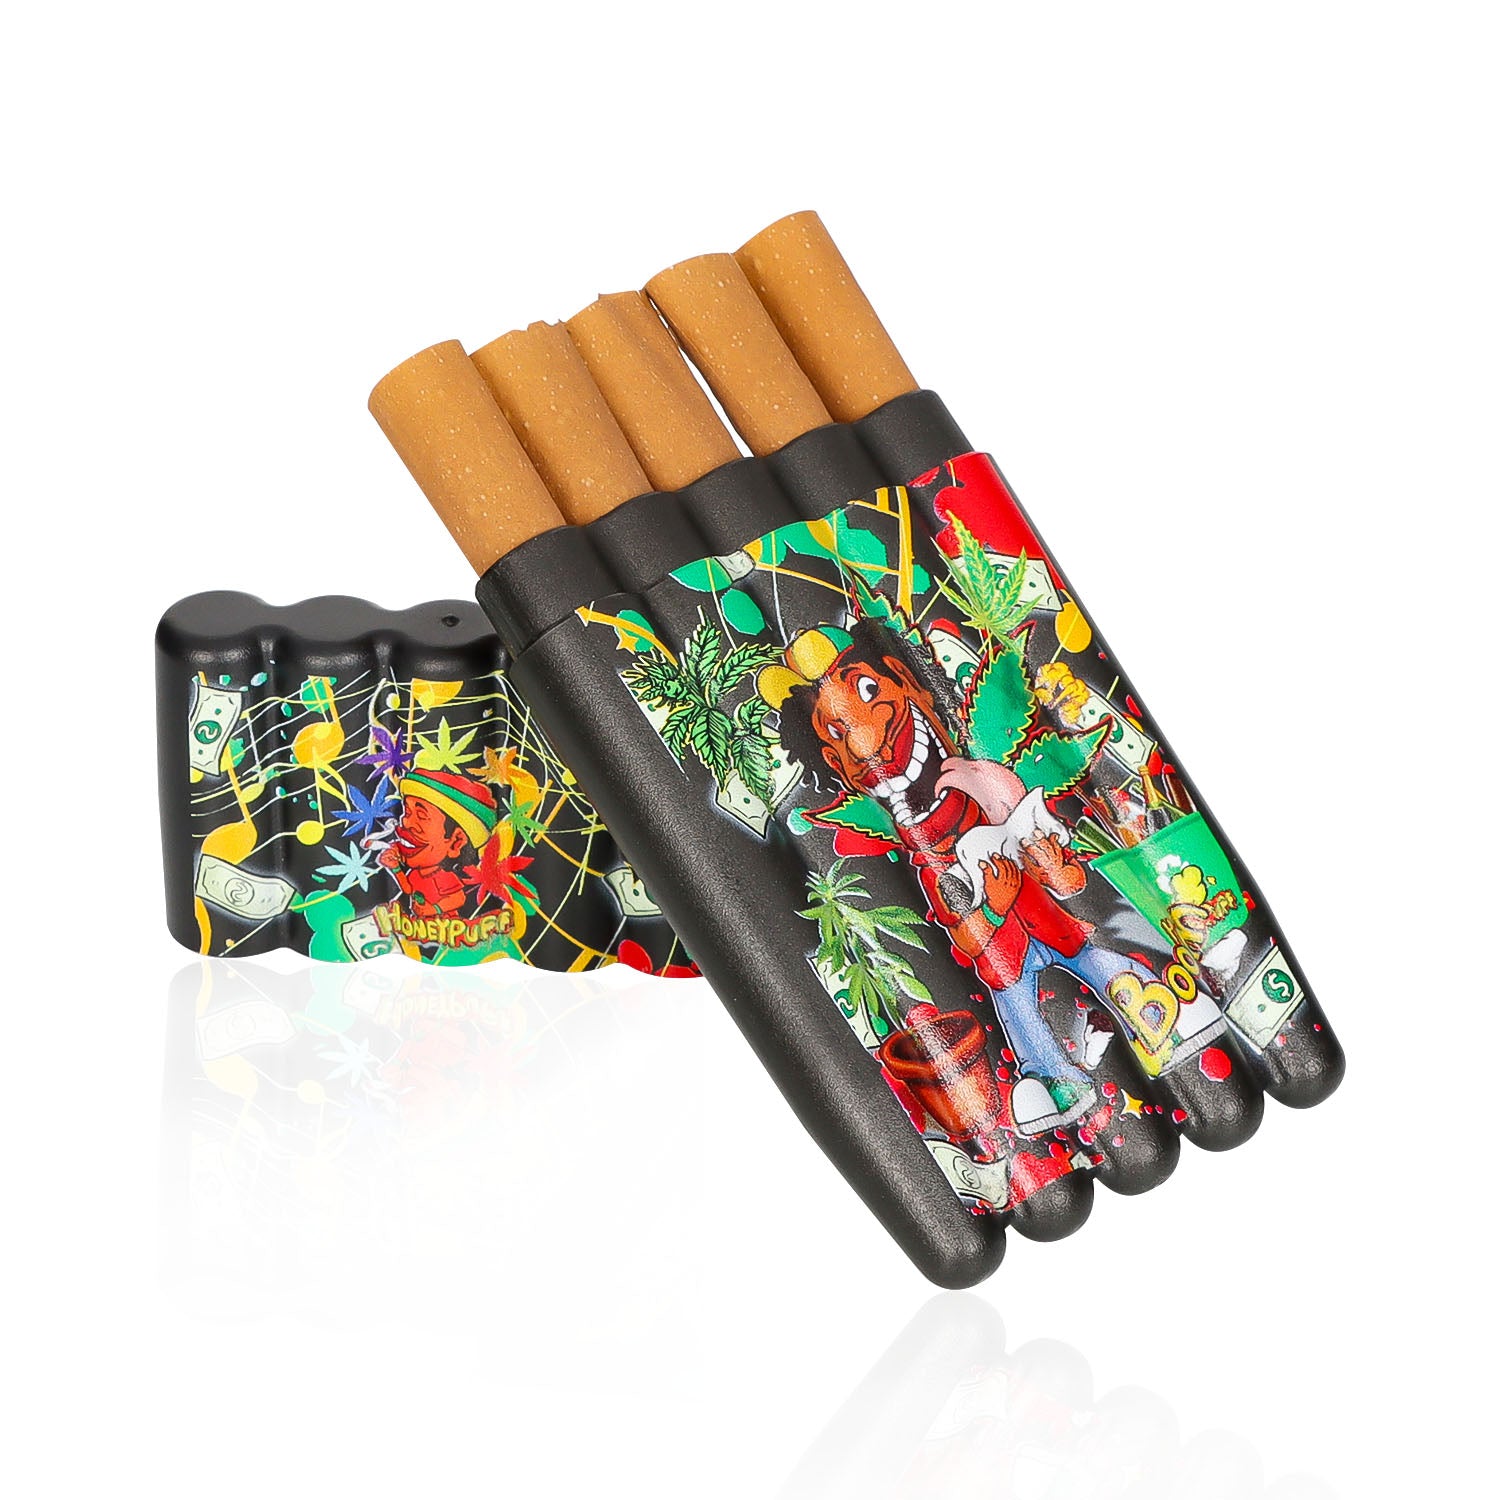 HONEYPUFF 120 mm Plastic Pre Roll Cigarette Case, Smell Proof Colorful